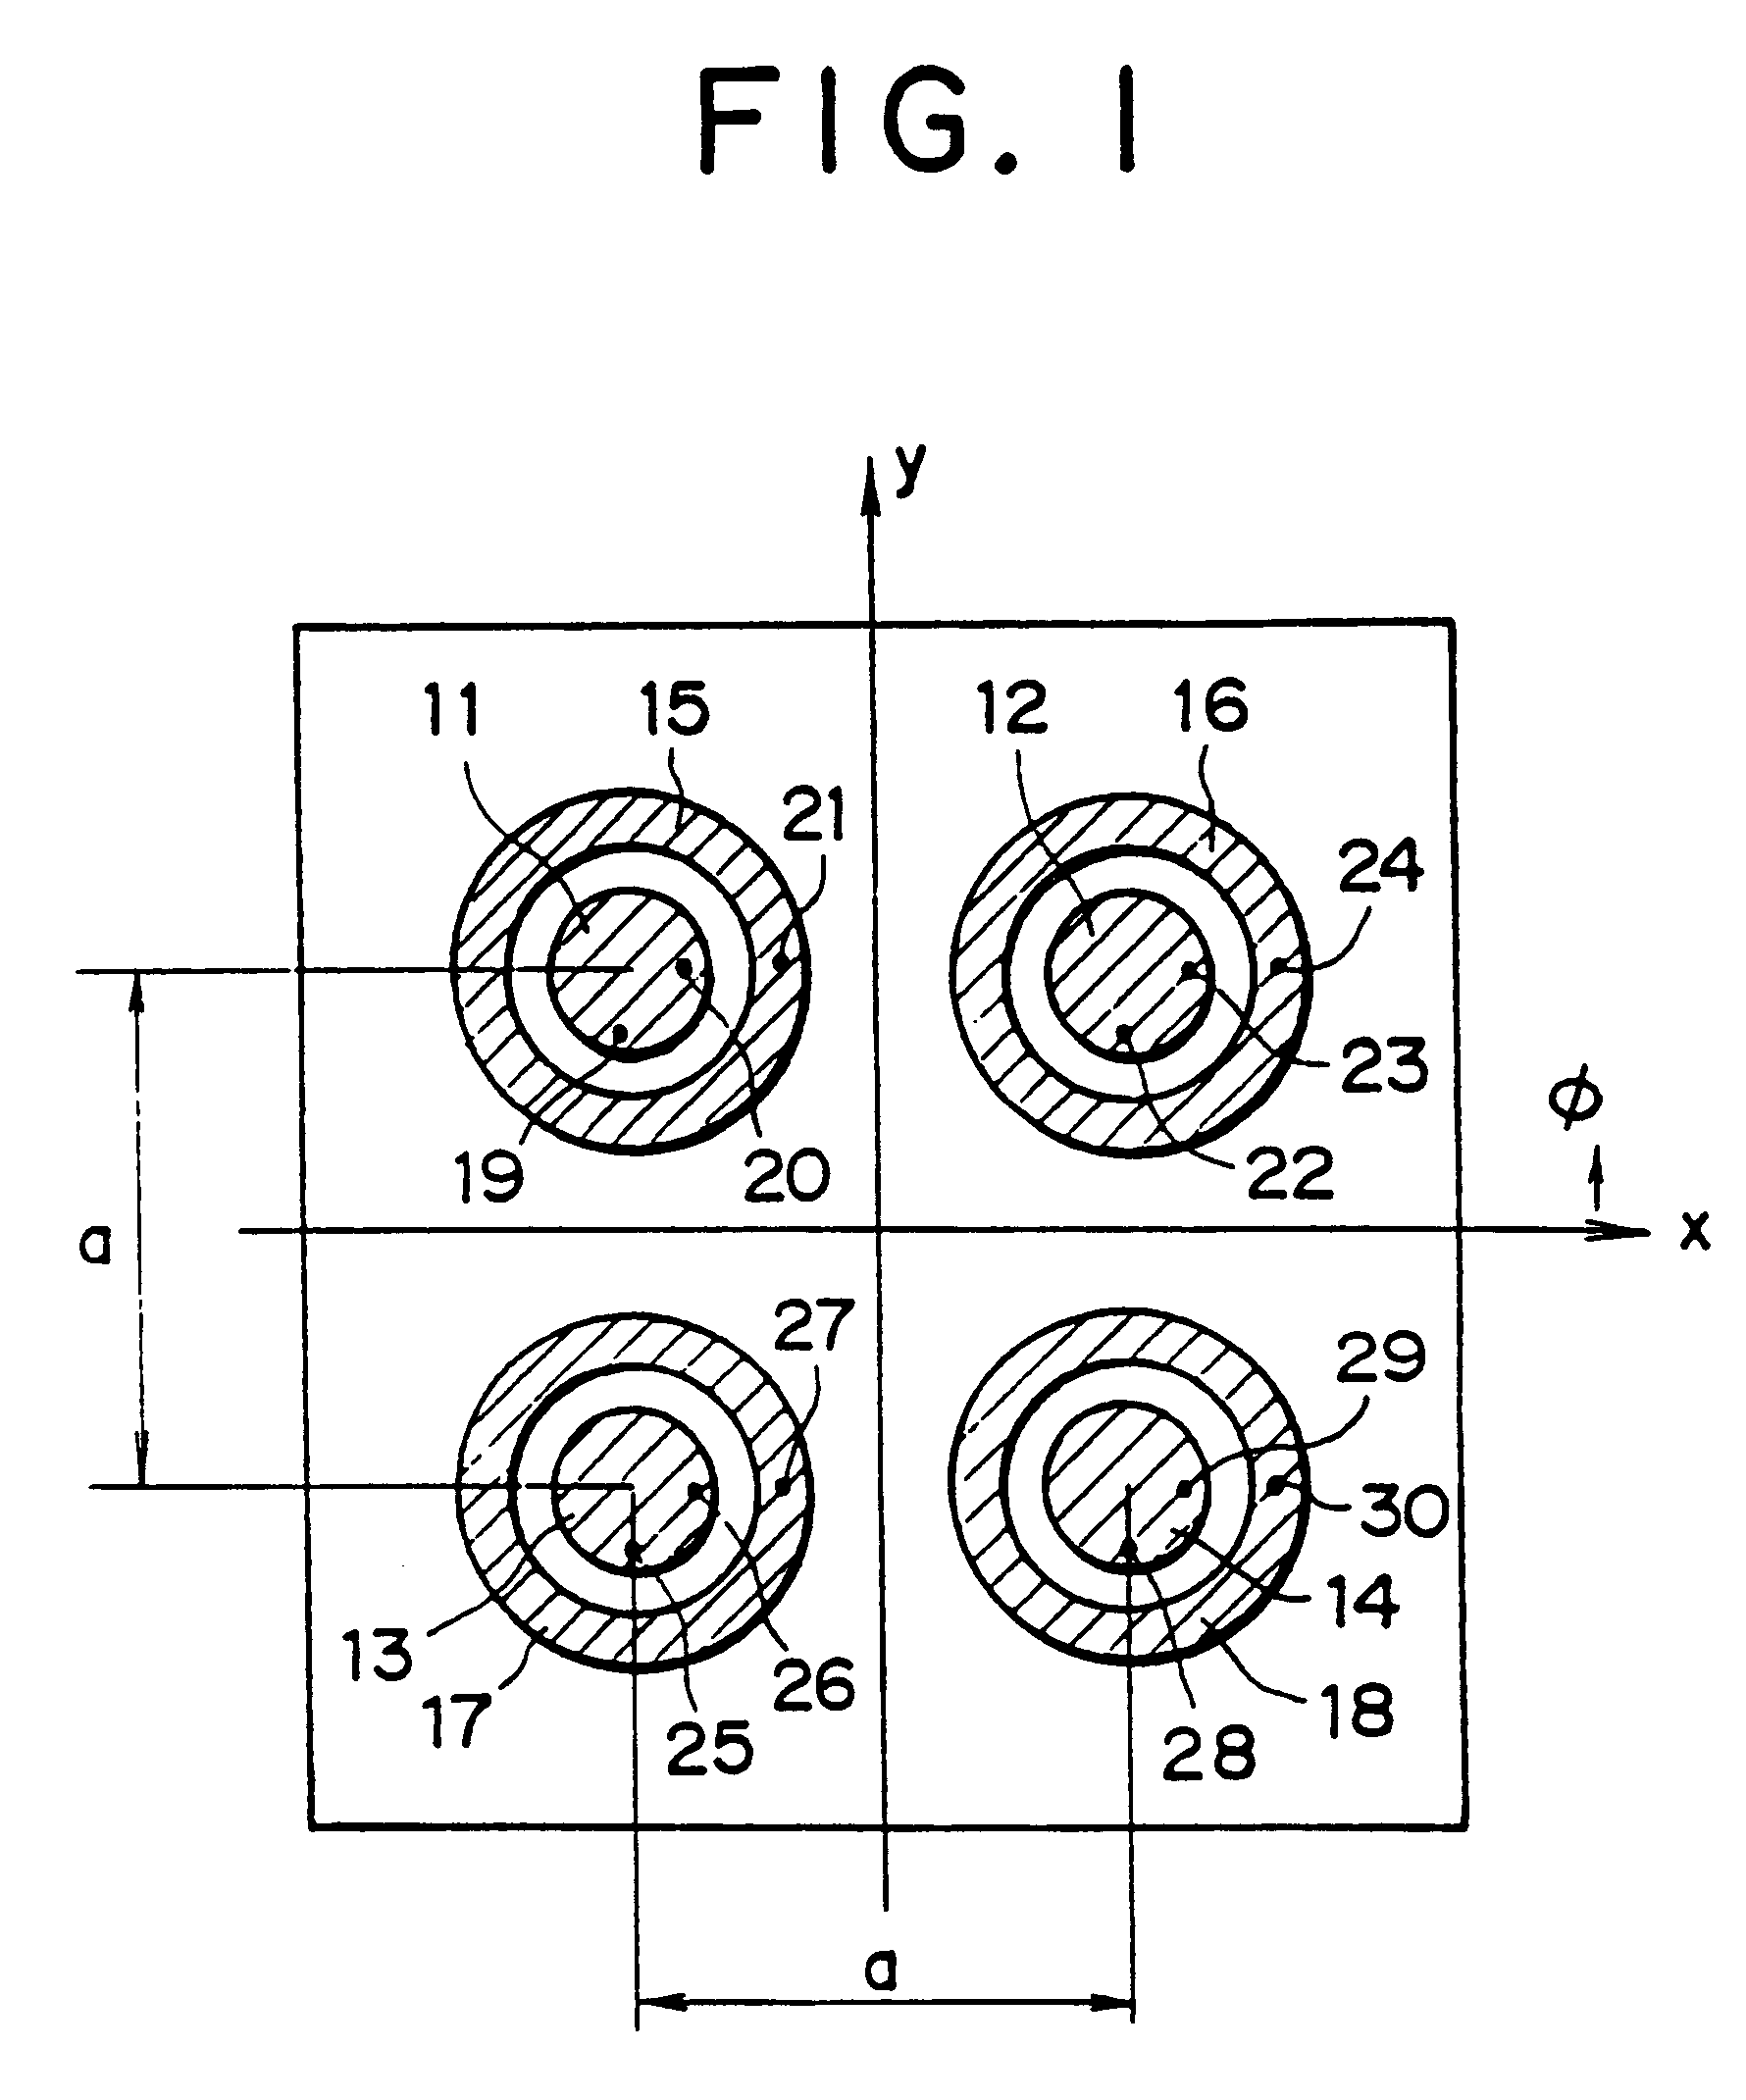 Beam scanning antennas with plurality of antenna elements for scanning beam direction